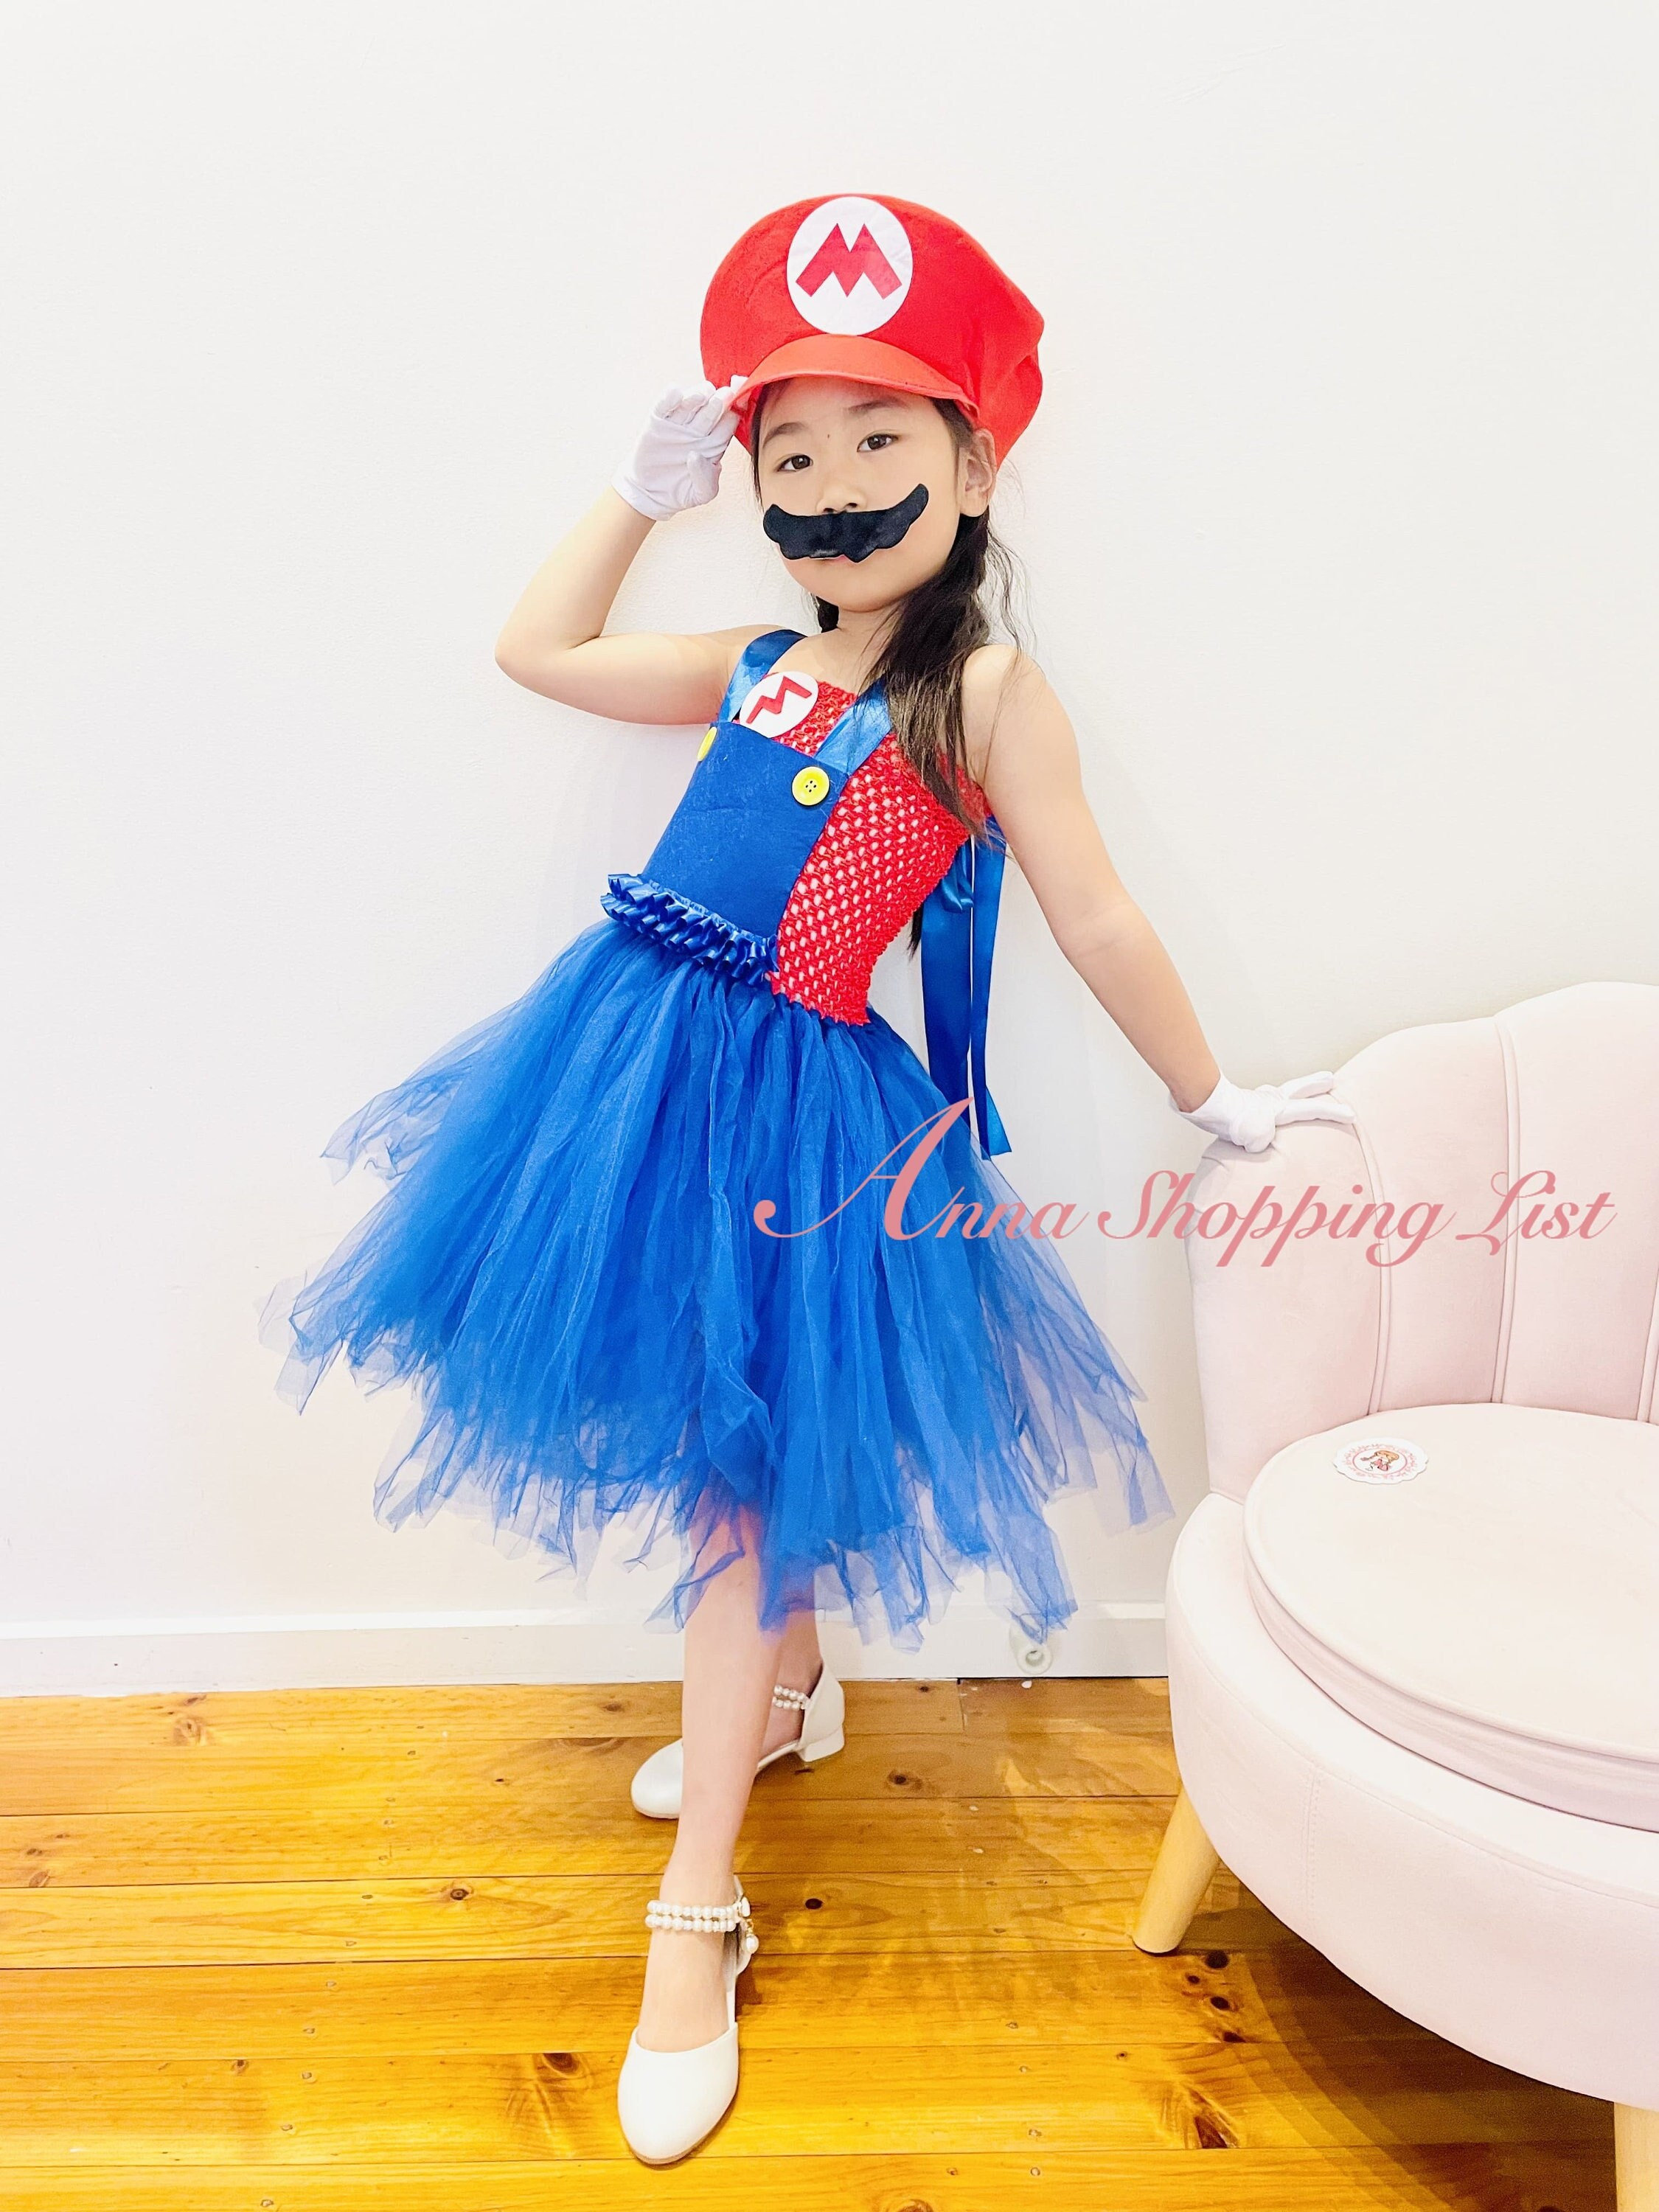 Adulte Mario Bros Style Déguisement Plombiers Mat Costume